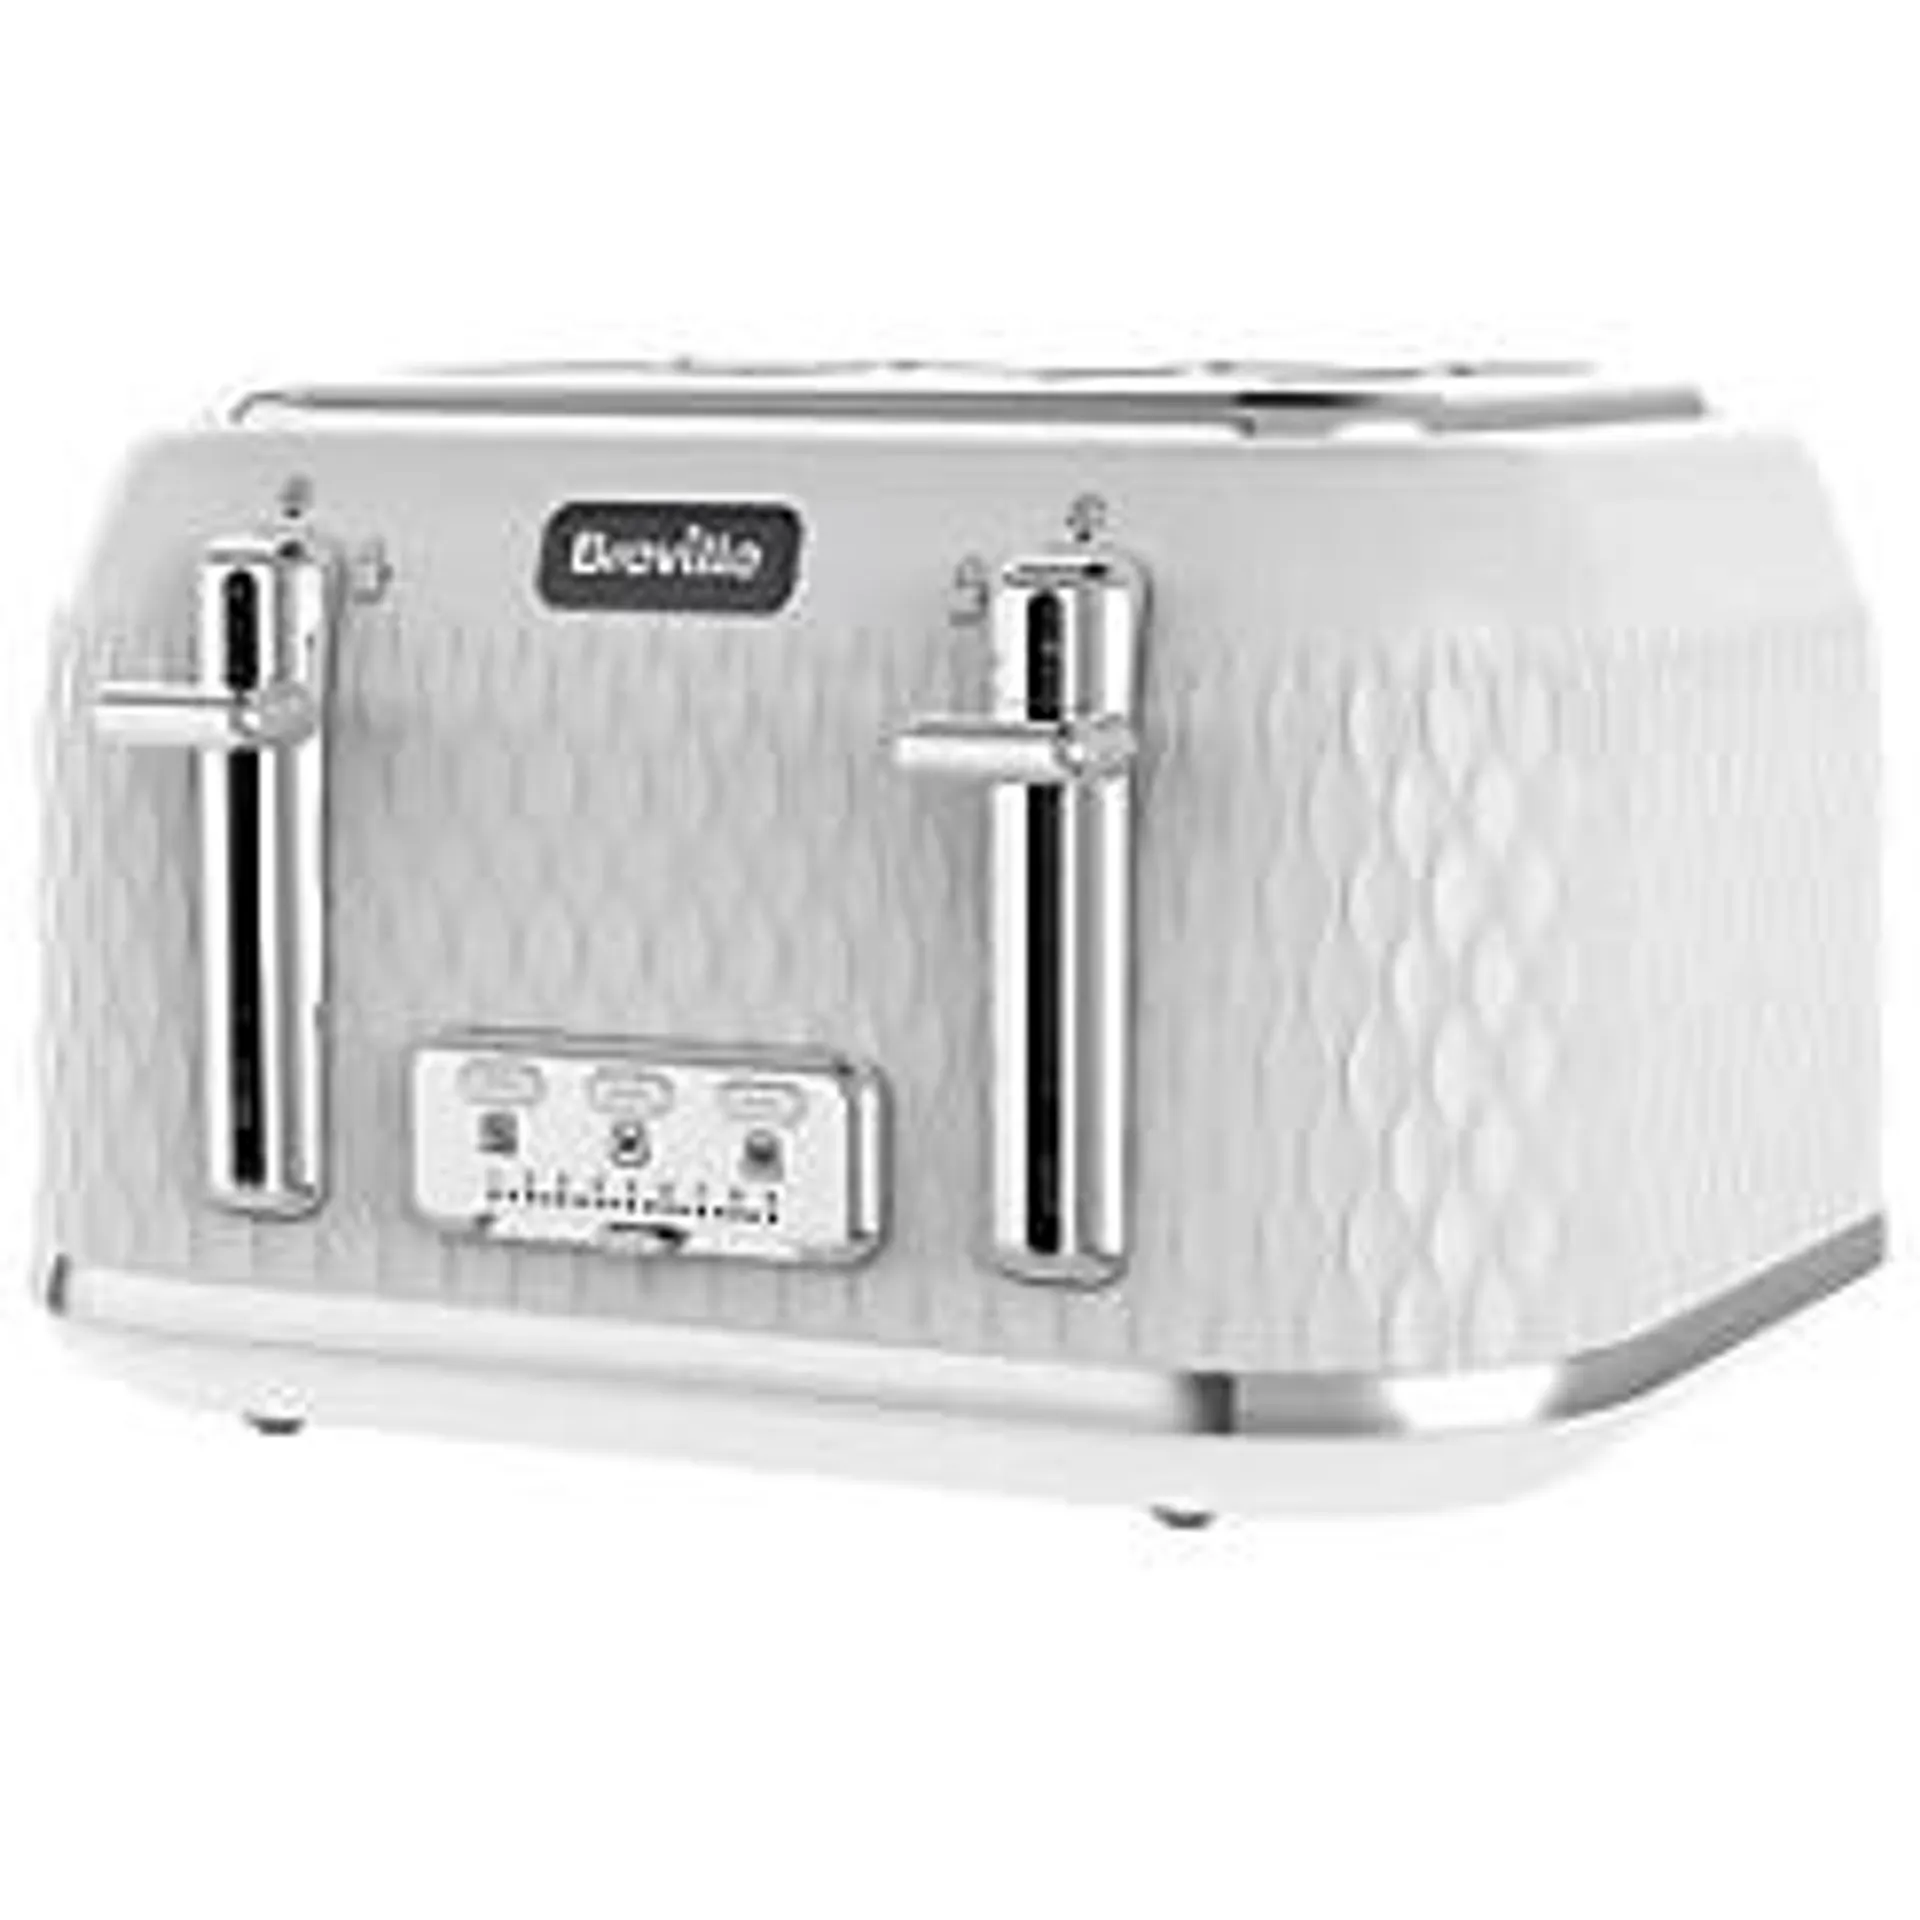 Breville Curve Collection 4 Slice Toaster - White